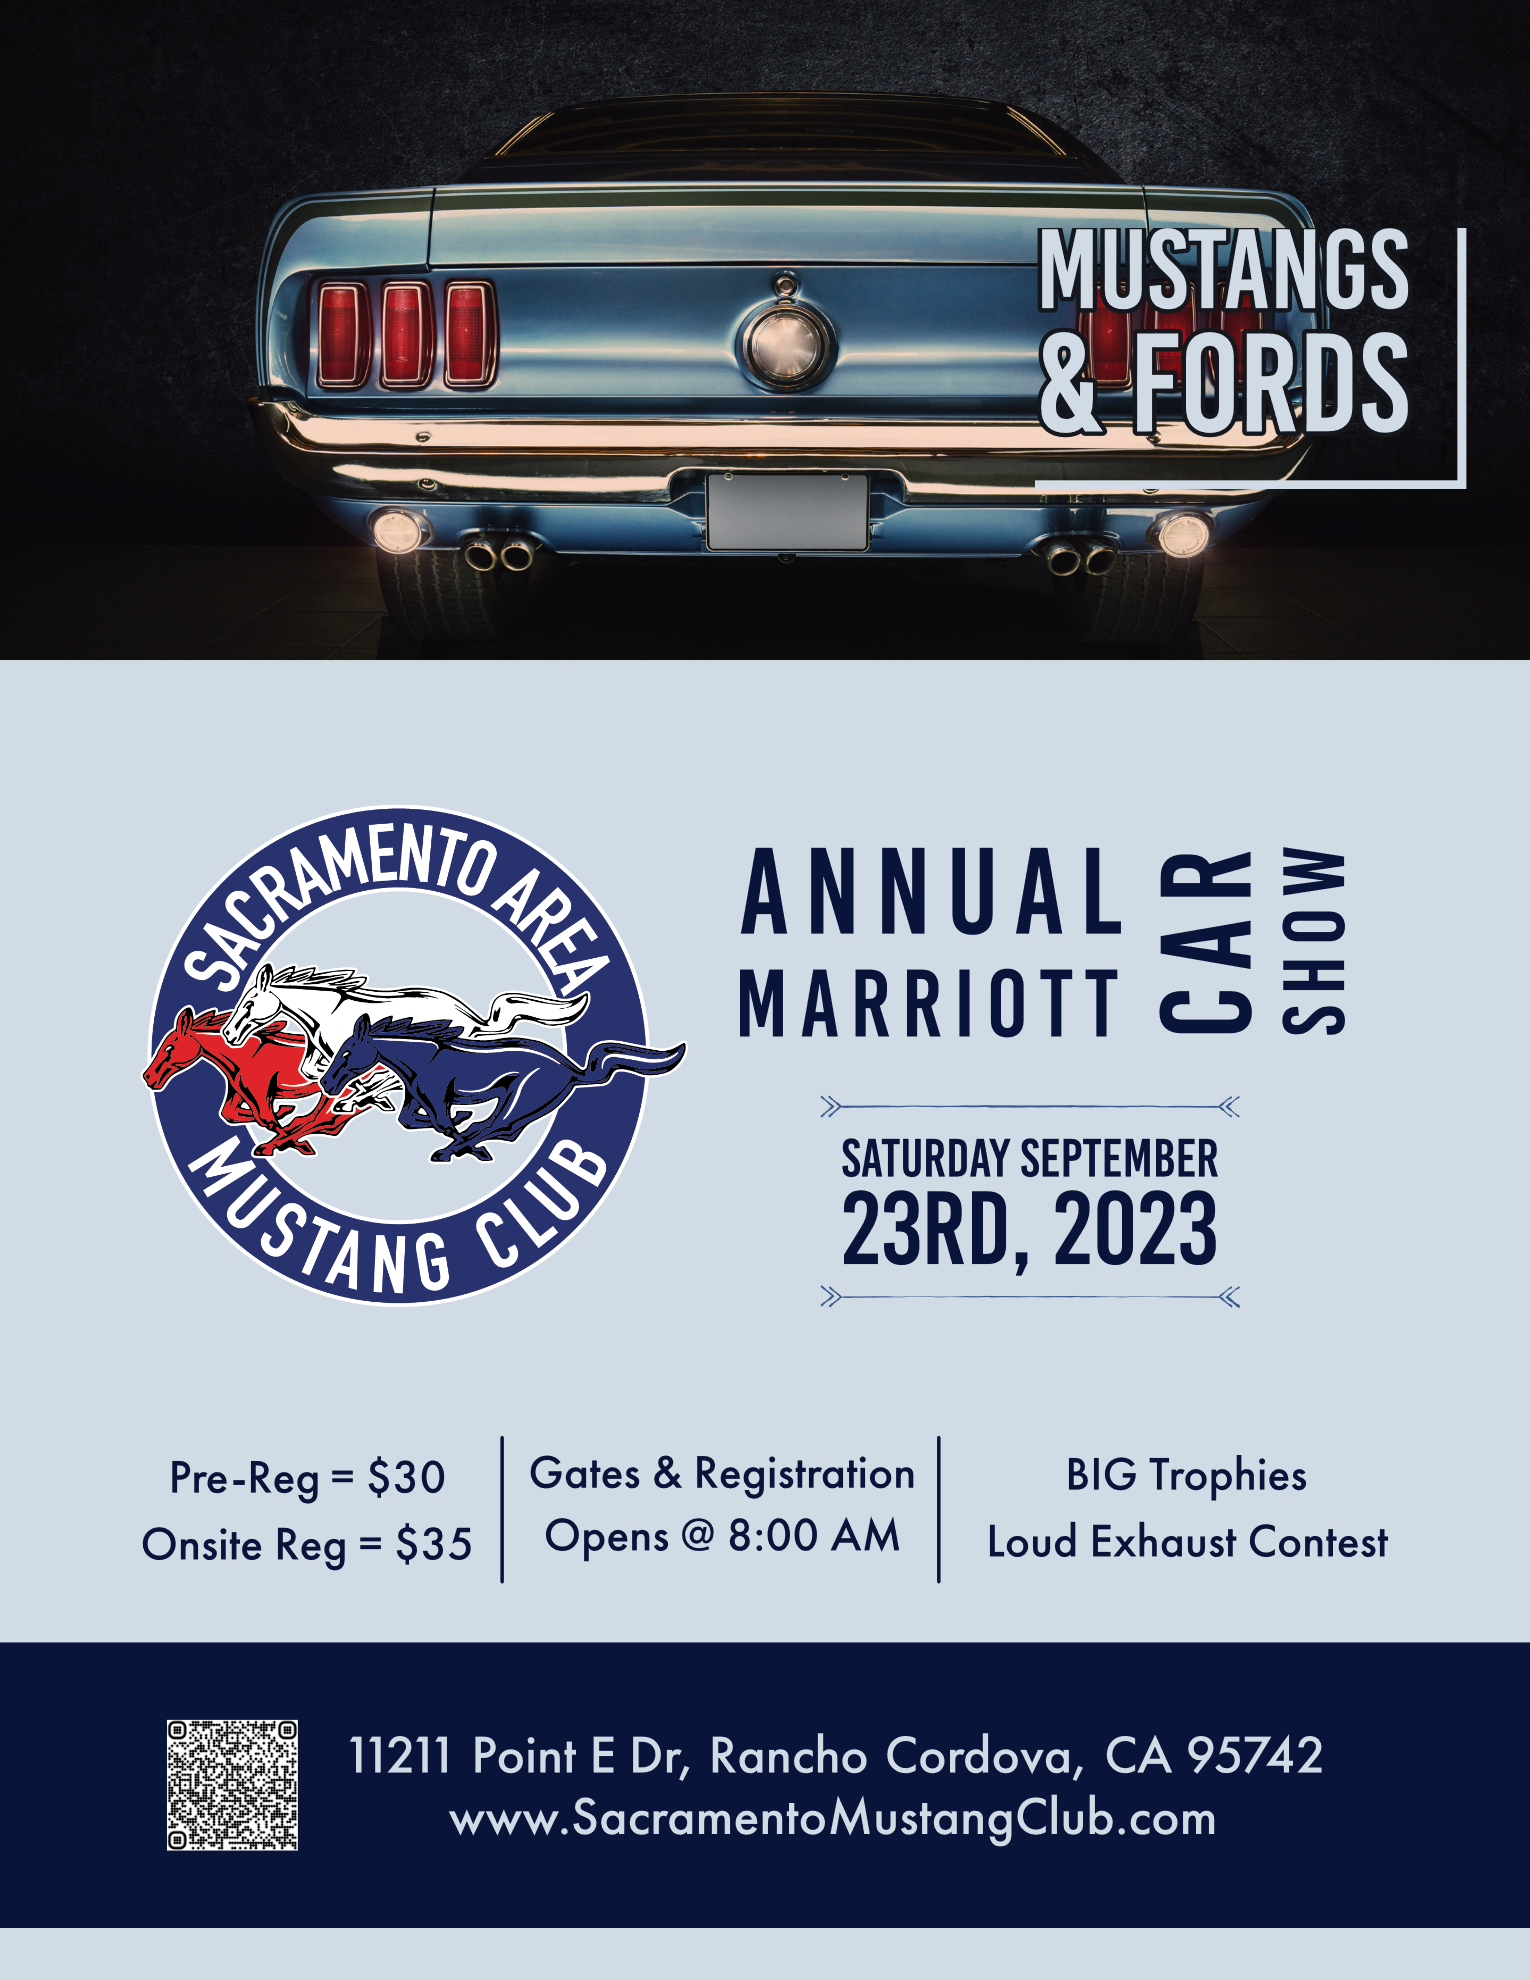 Mustangs & Fords Car Show